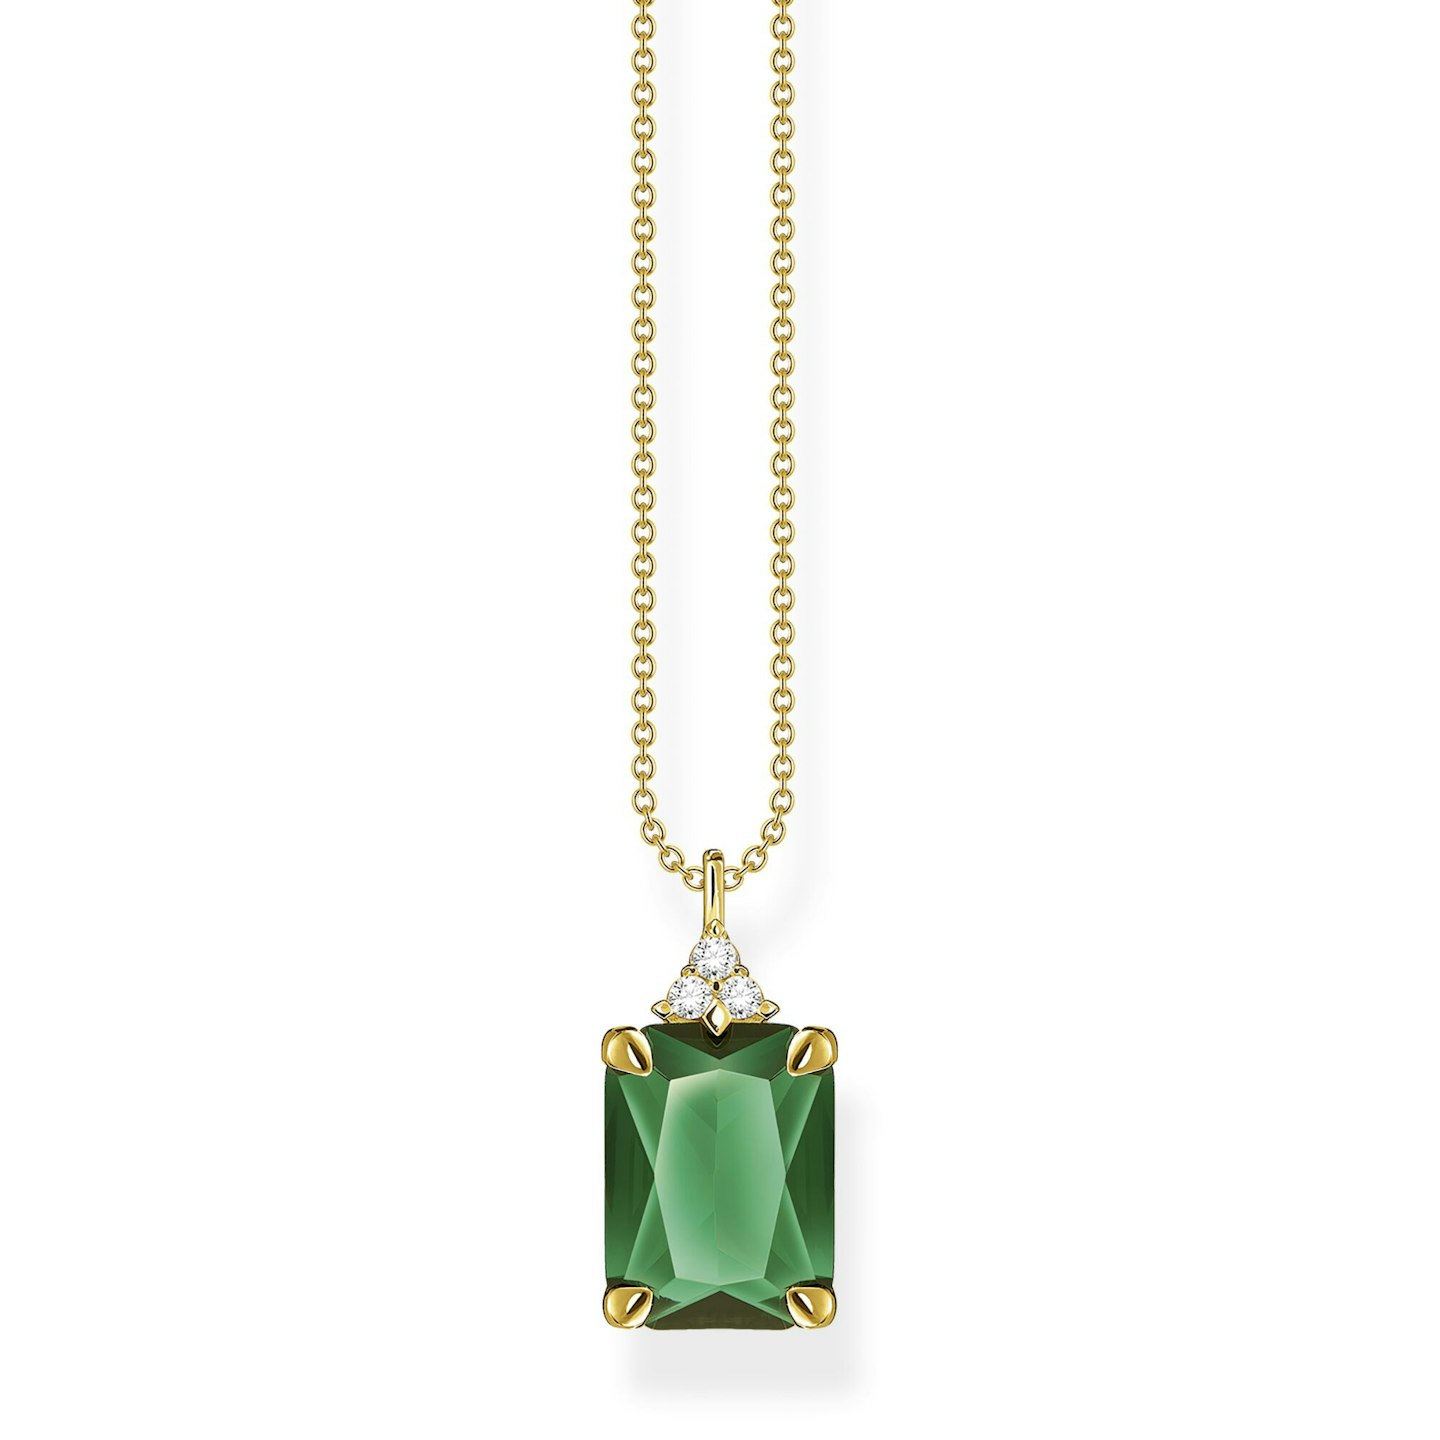 Necklace Green Stone, £239